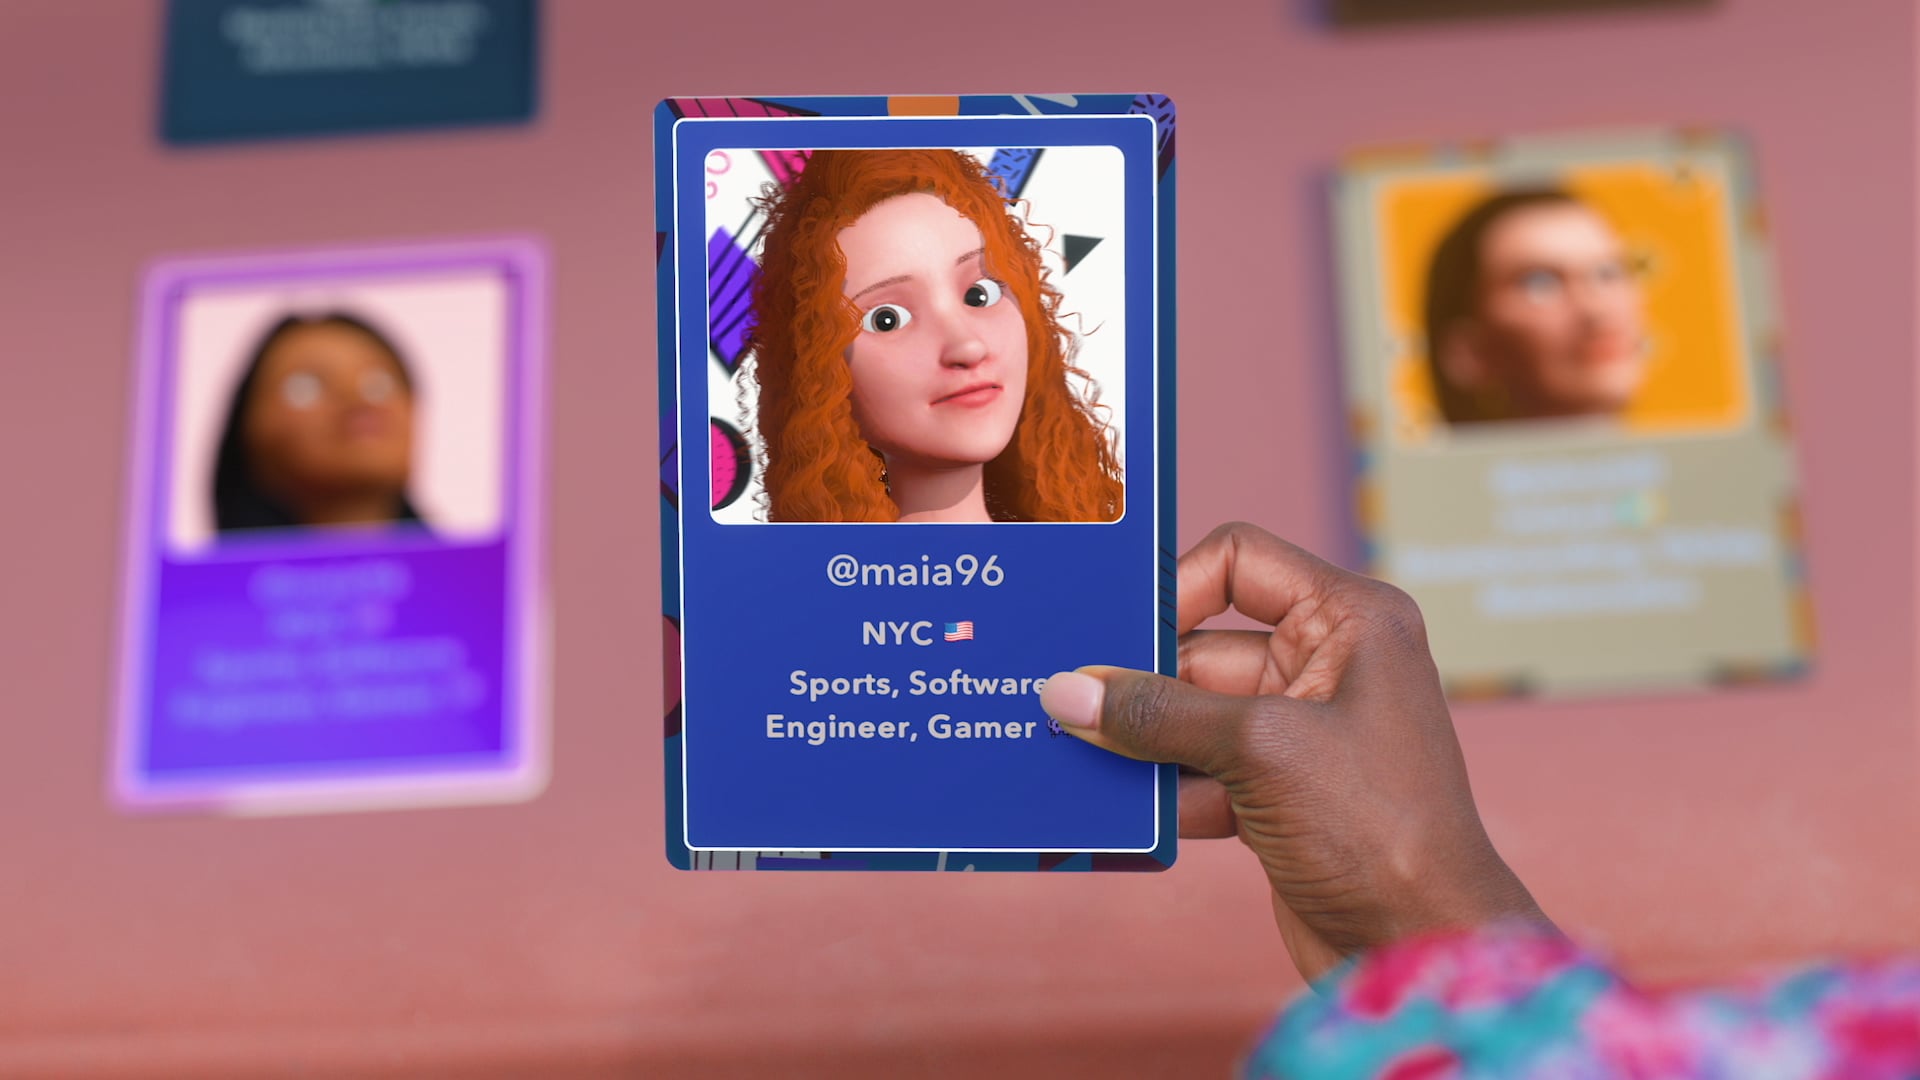 Itsme - Introducing Avatars 2.0 and Trading Cards